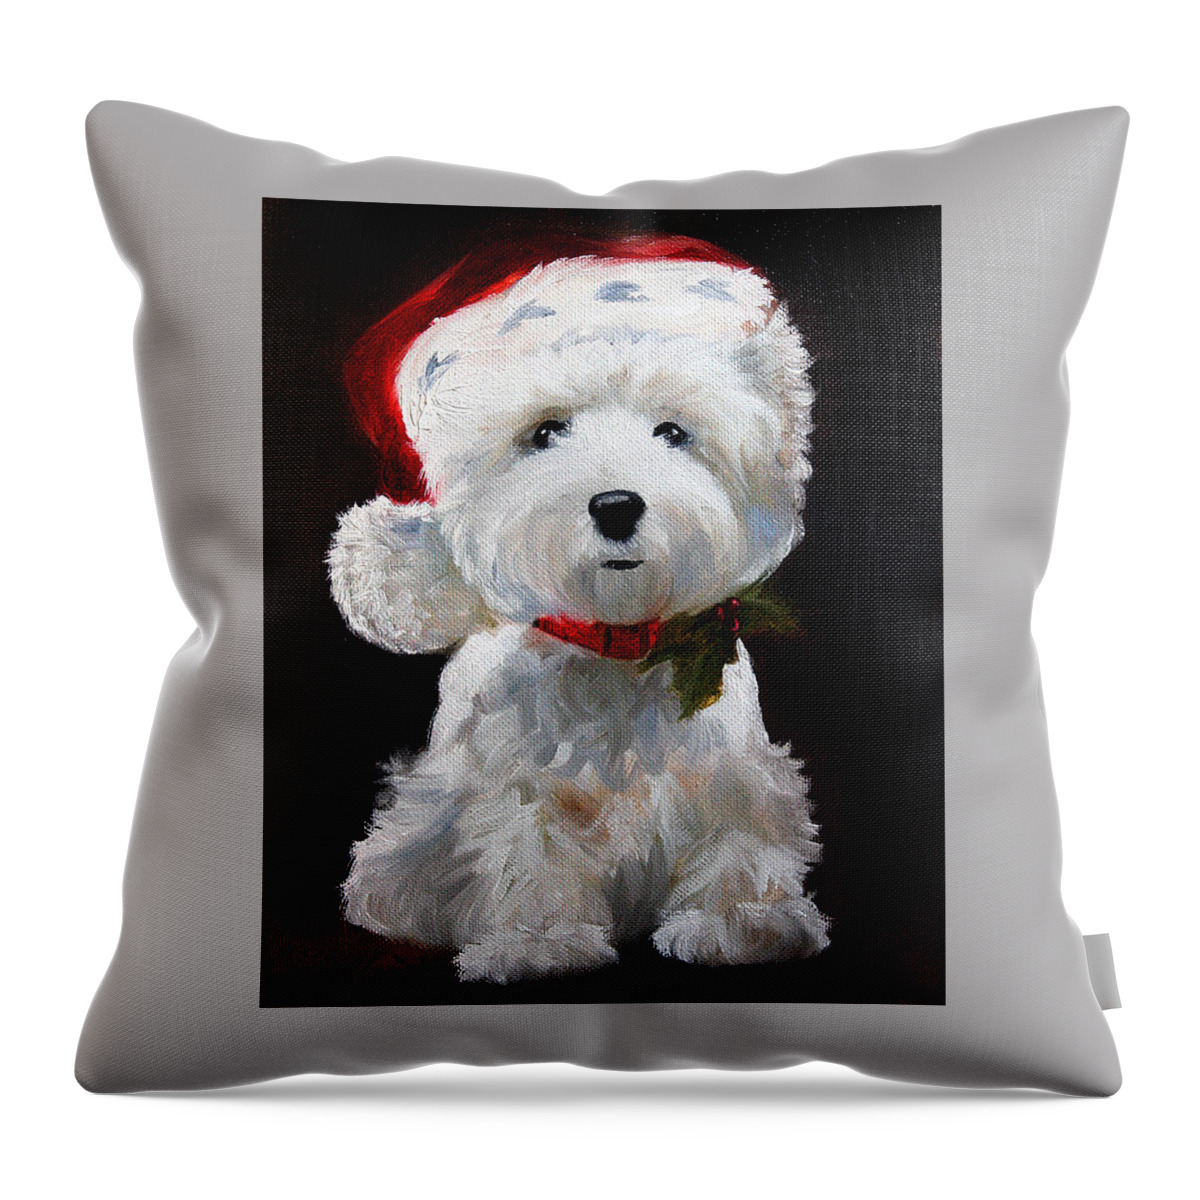 Christmas Throw Pillow featuring the painting Christmas by Mary Sparrow